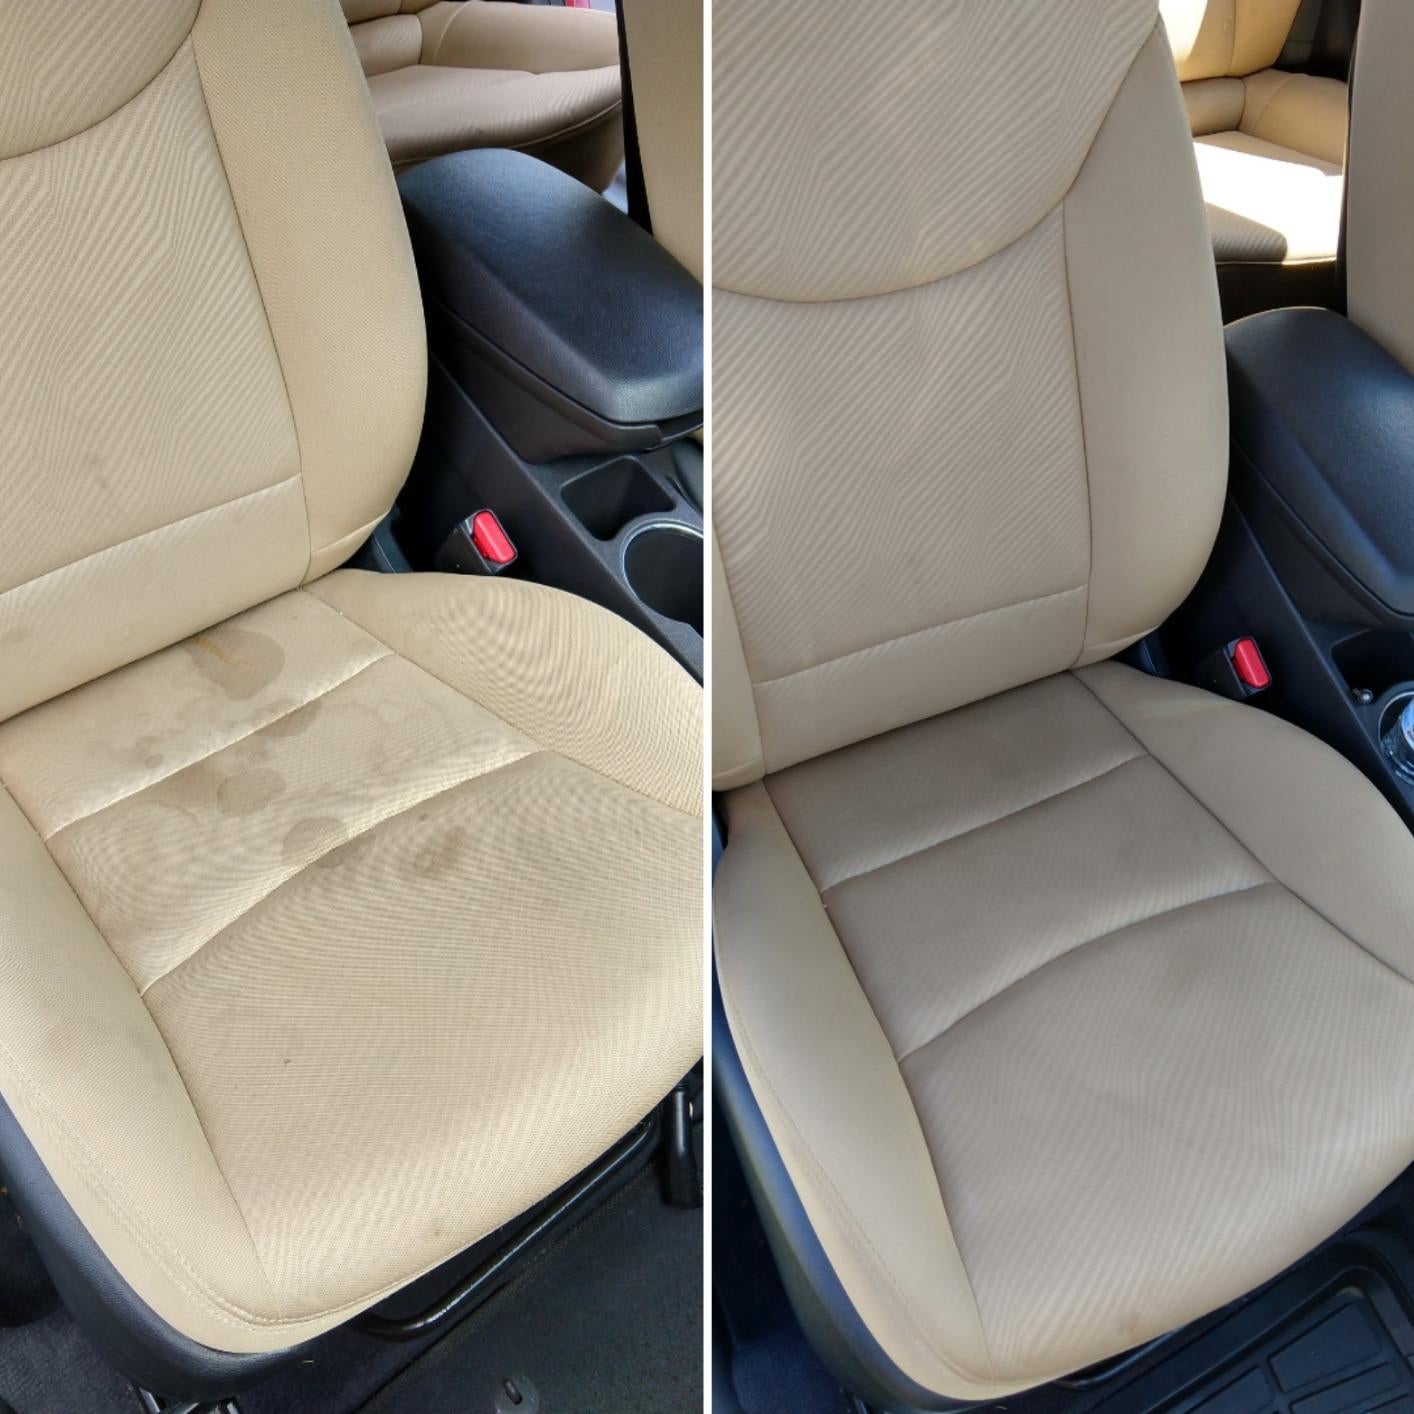 reviewer before and after photos showing a stained car seat, and then the car seat looking clean